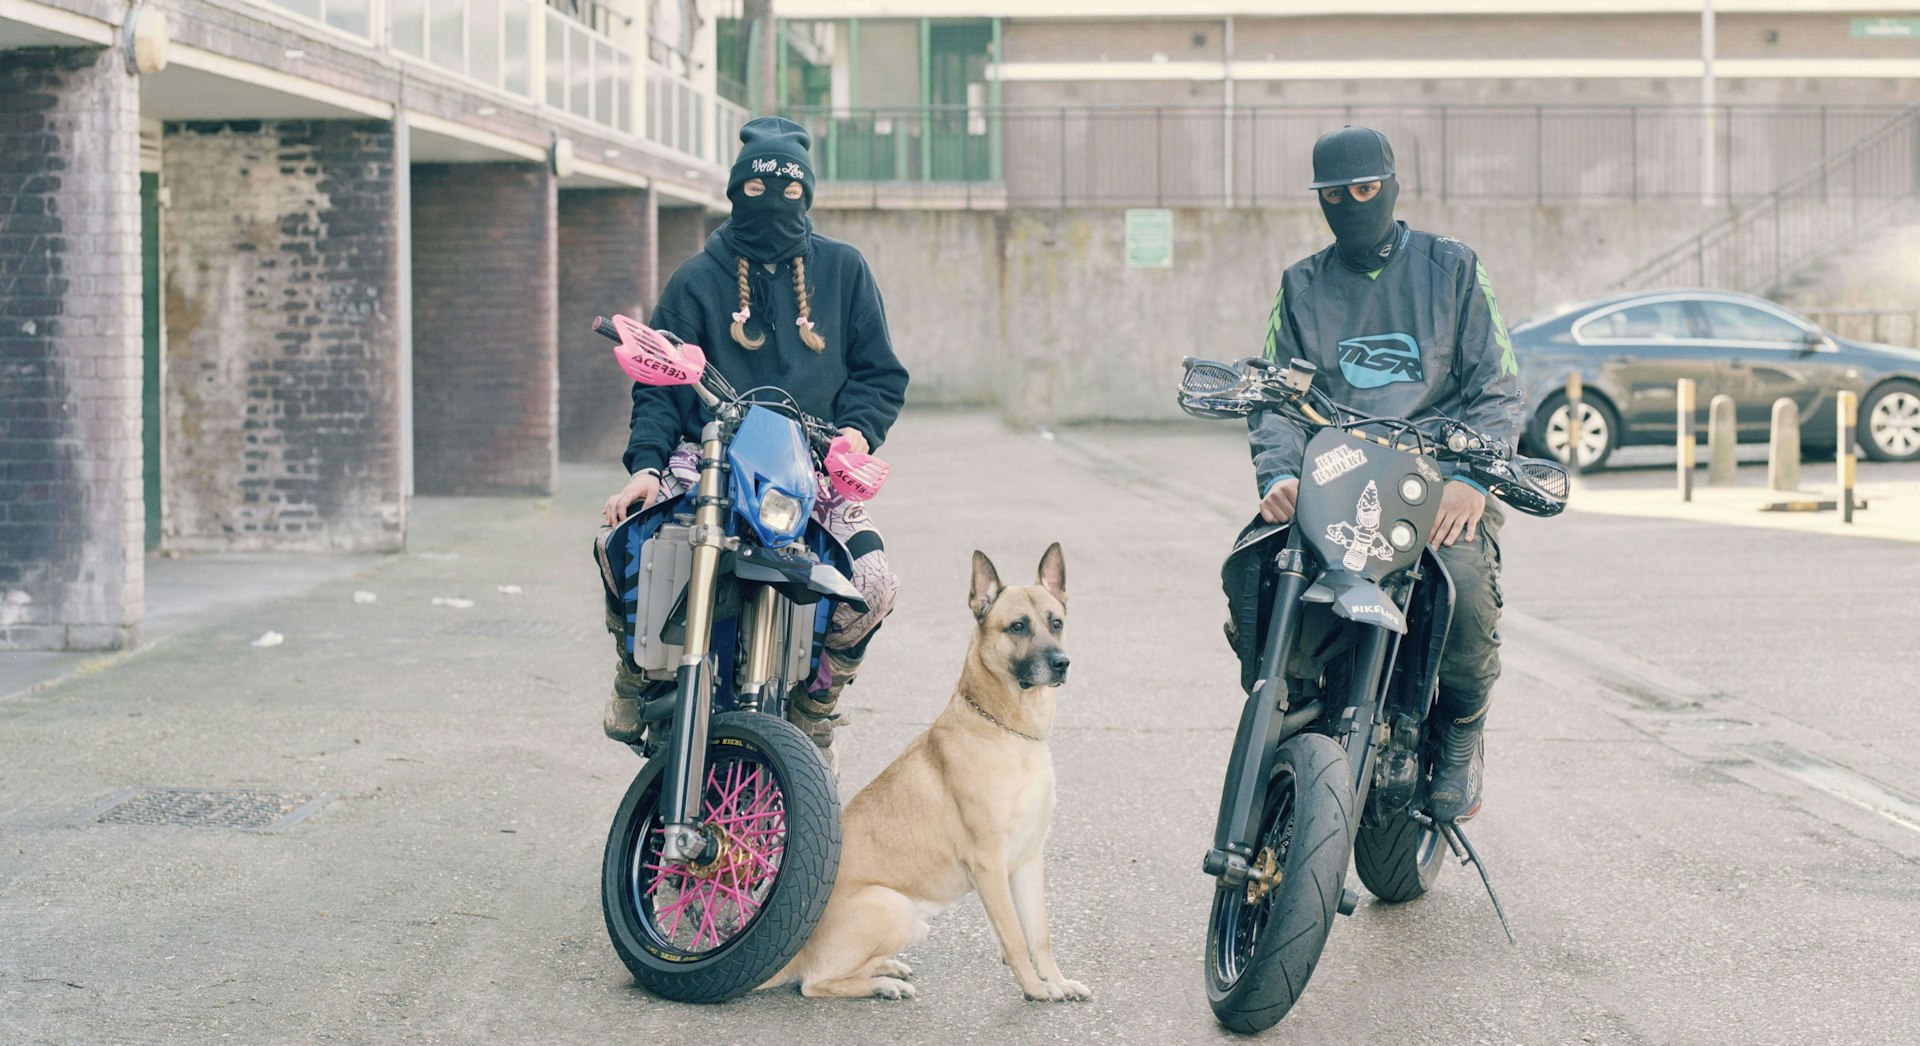 Tearing up the tarmac with Britain's urban dirt bikers